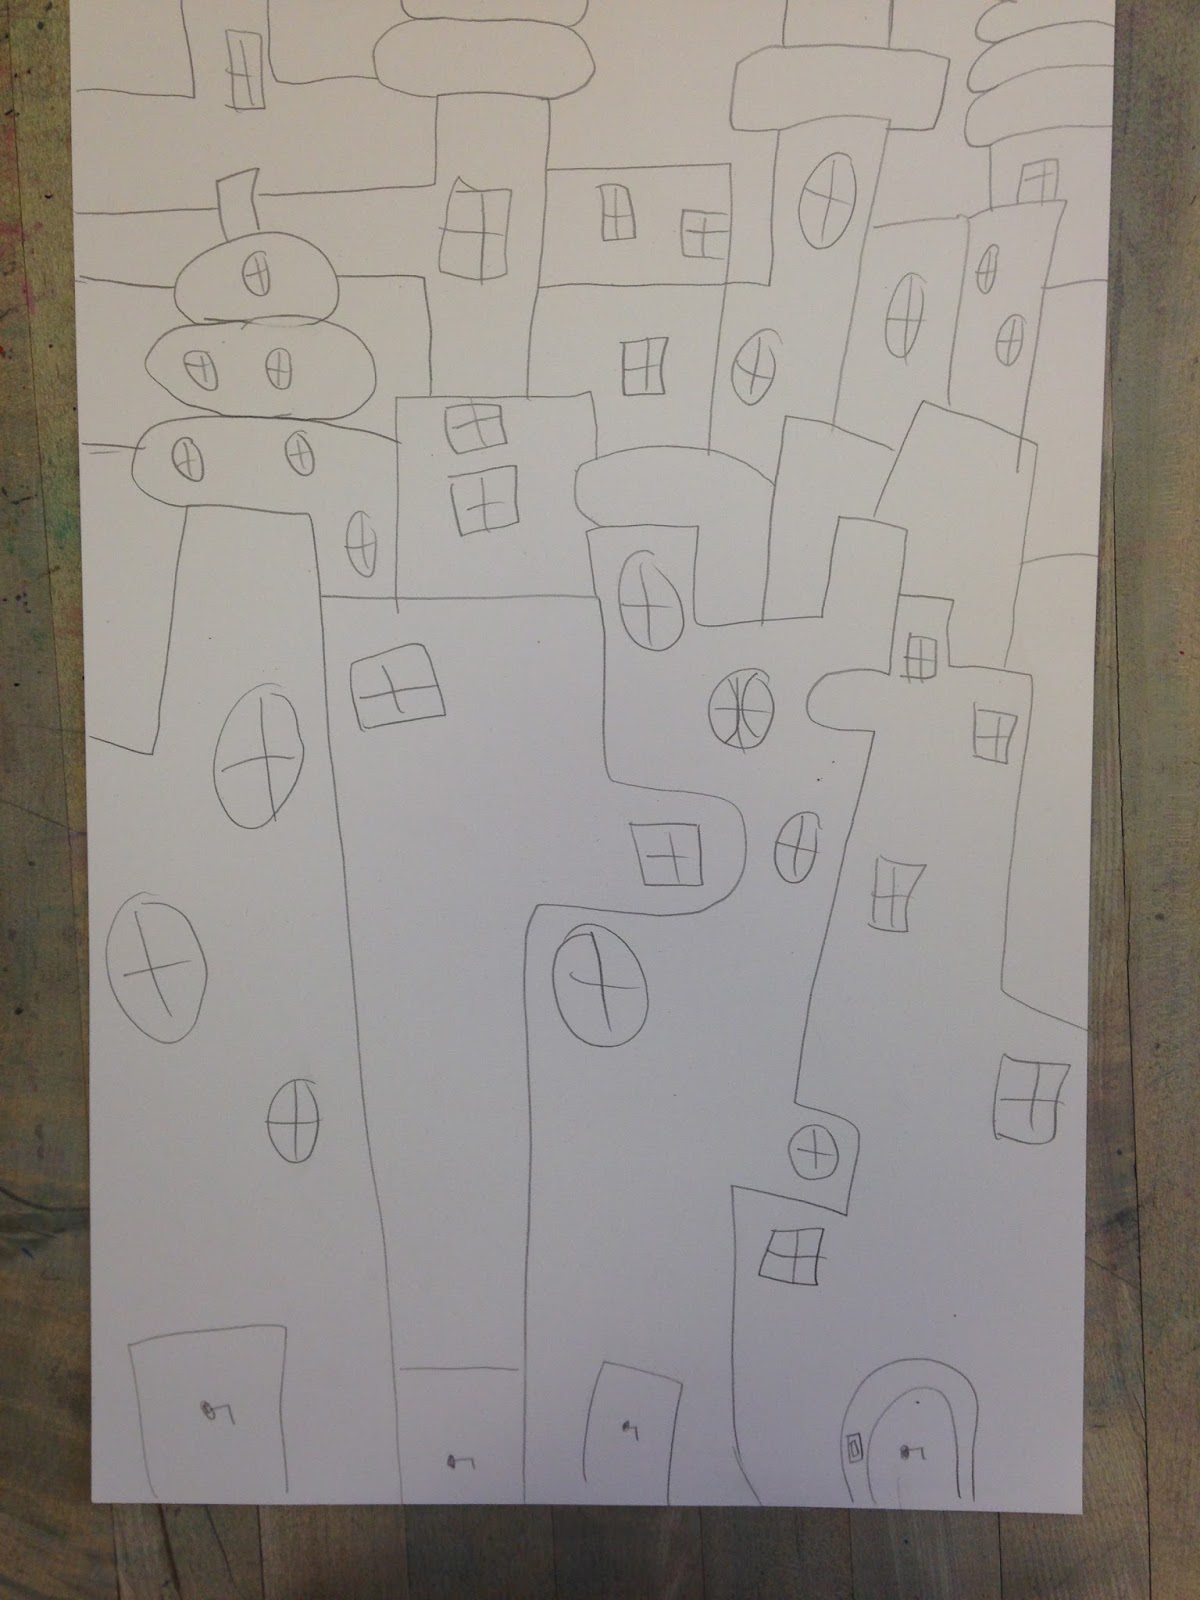 Art Room Blog: 3rd Grade Cities in the Style of IM Pei and James Rizzi ...